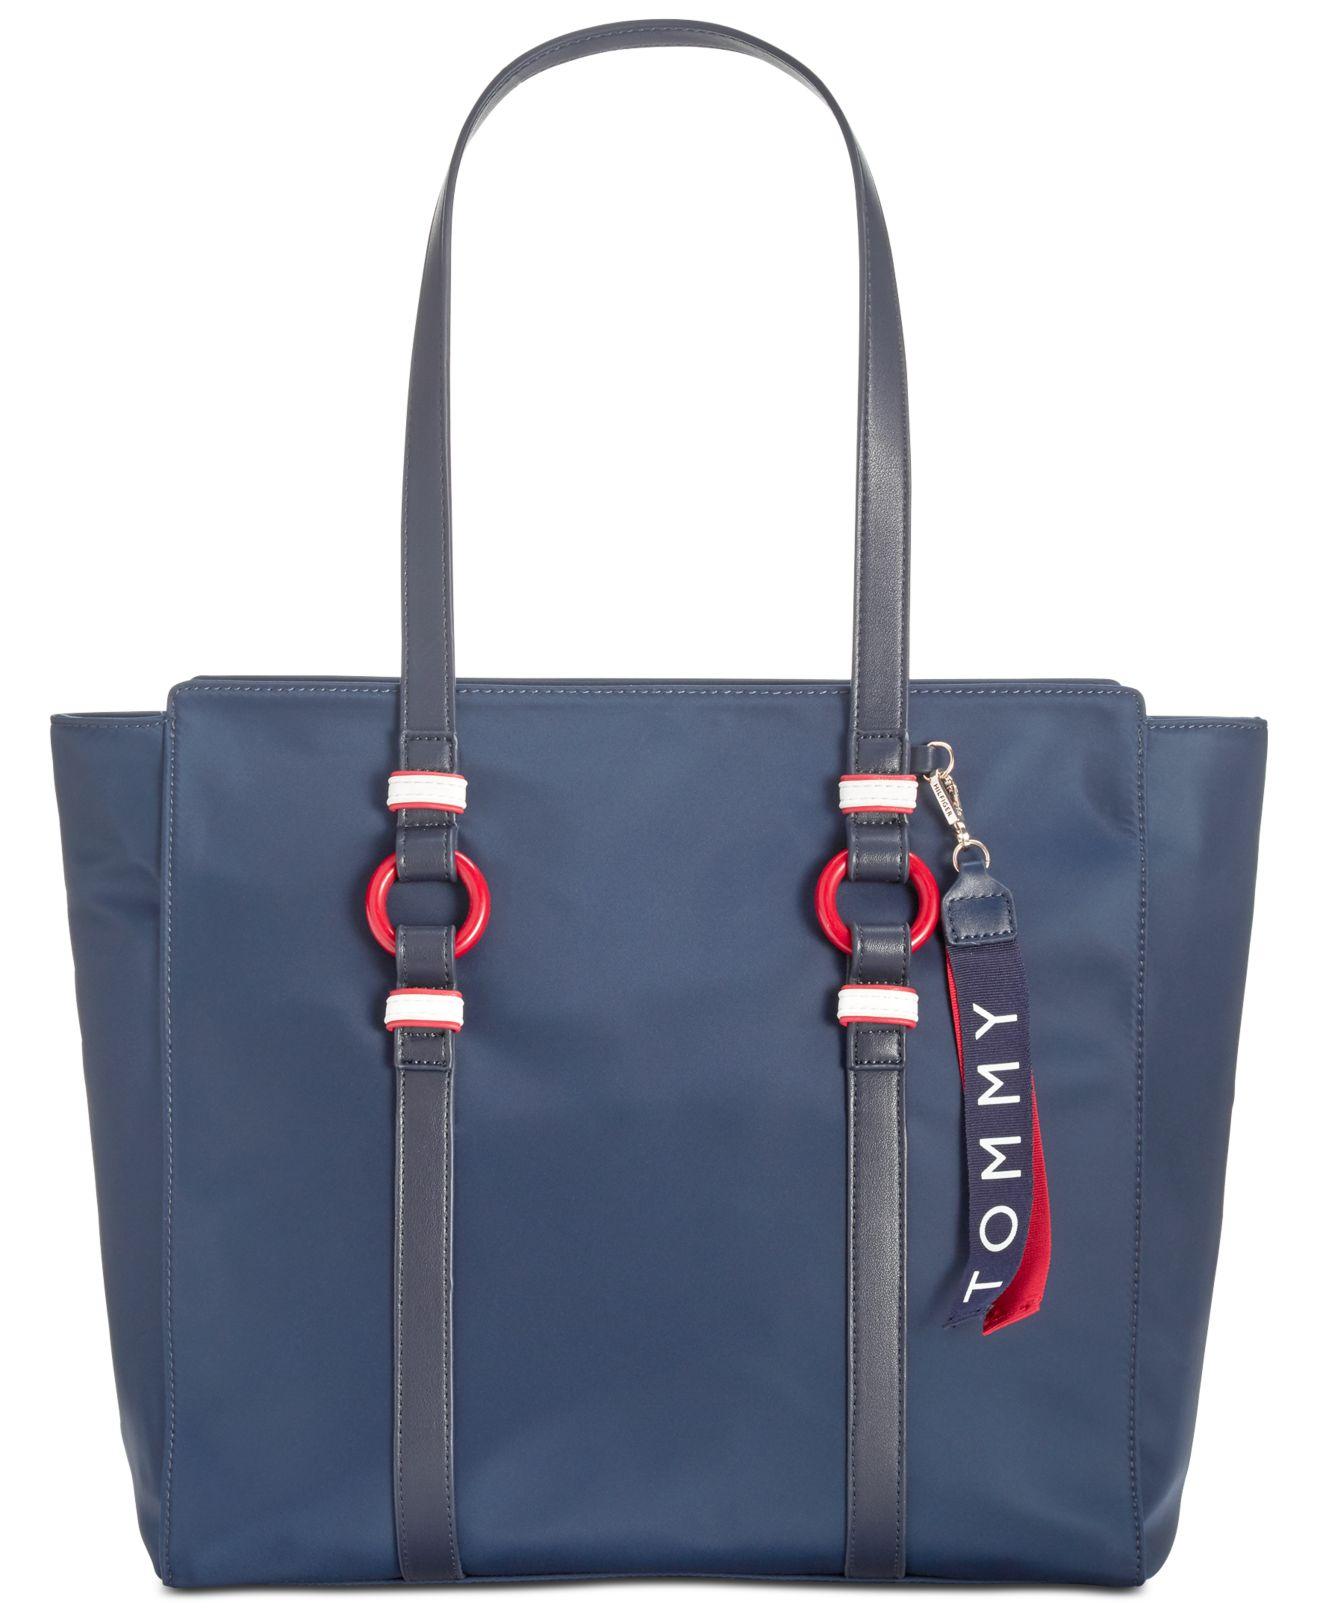 Tommy Hilfiger Leona Nylon Tote in Blue - Lyst